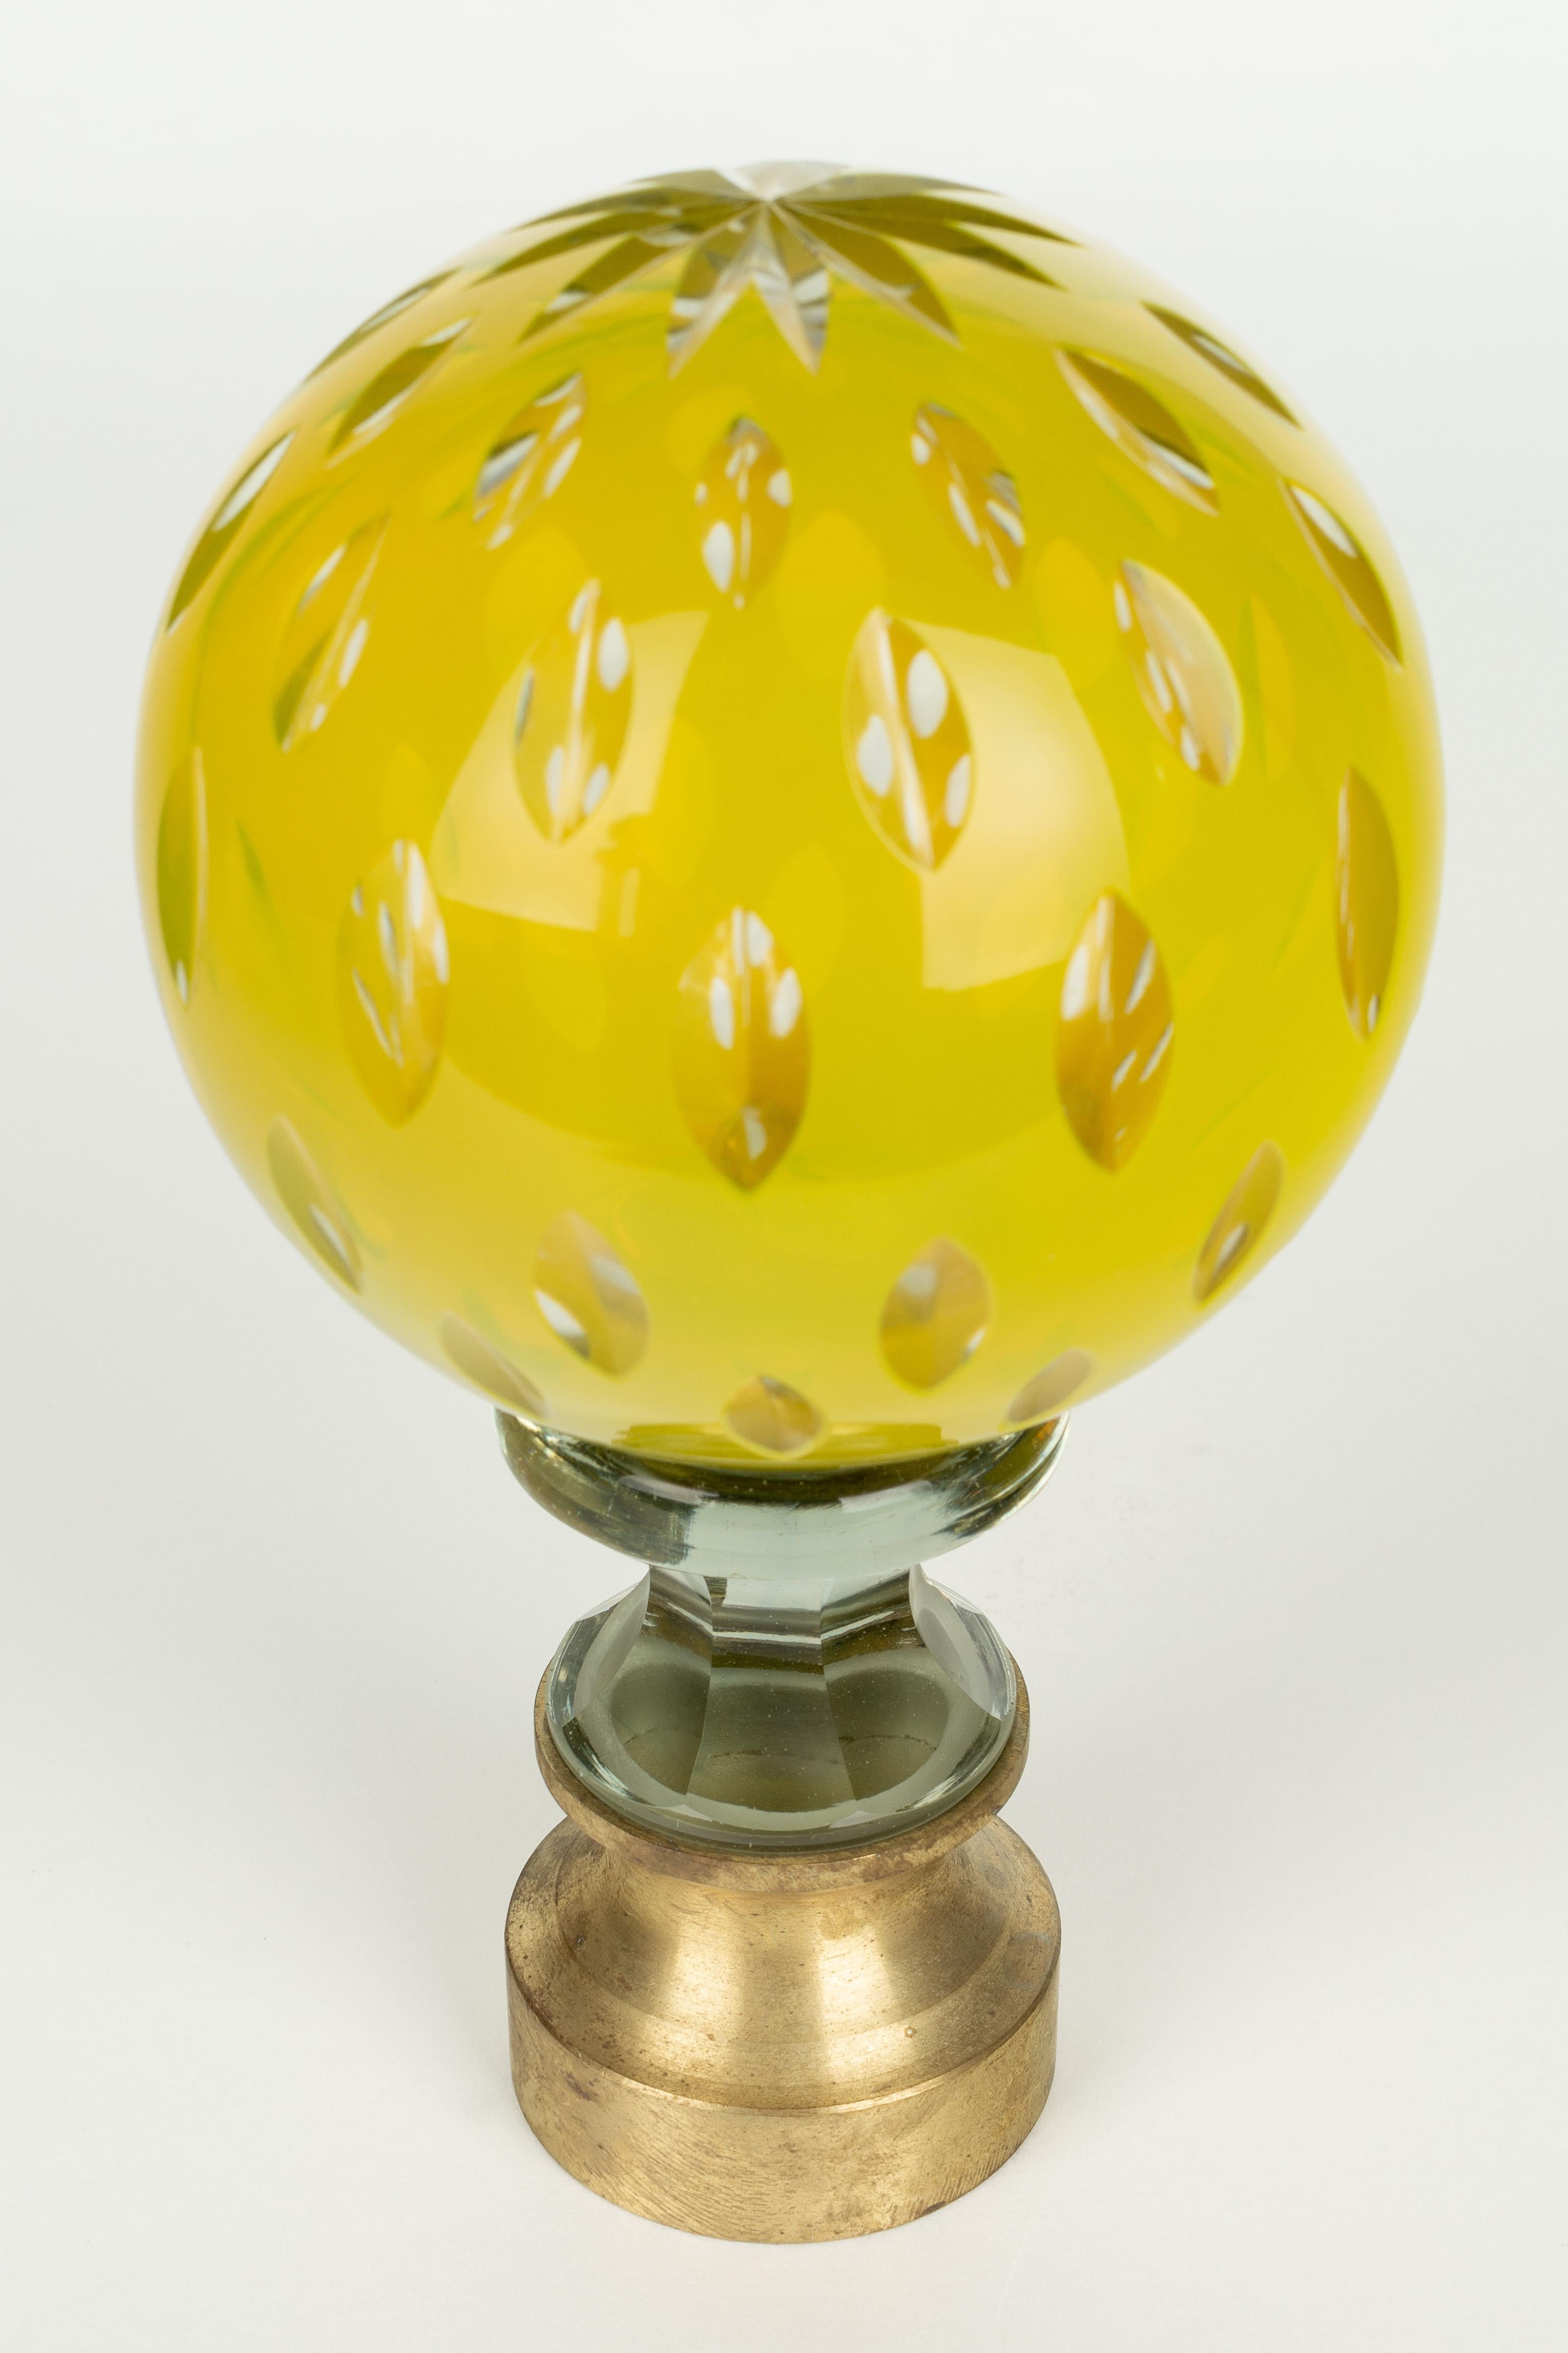 Cast French Glass Boule d'escalier or Newel Post Finial